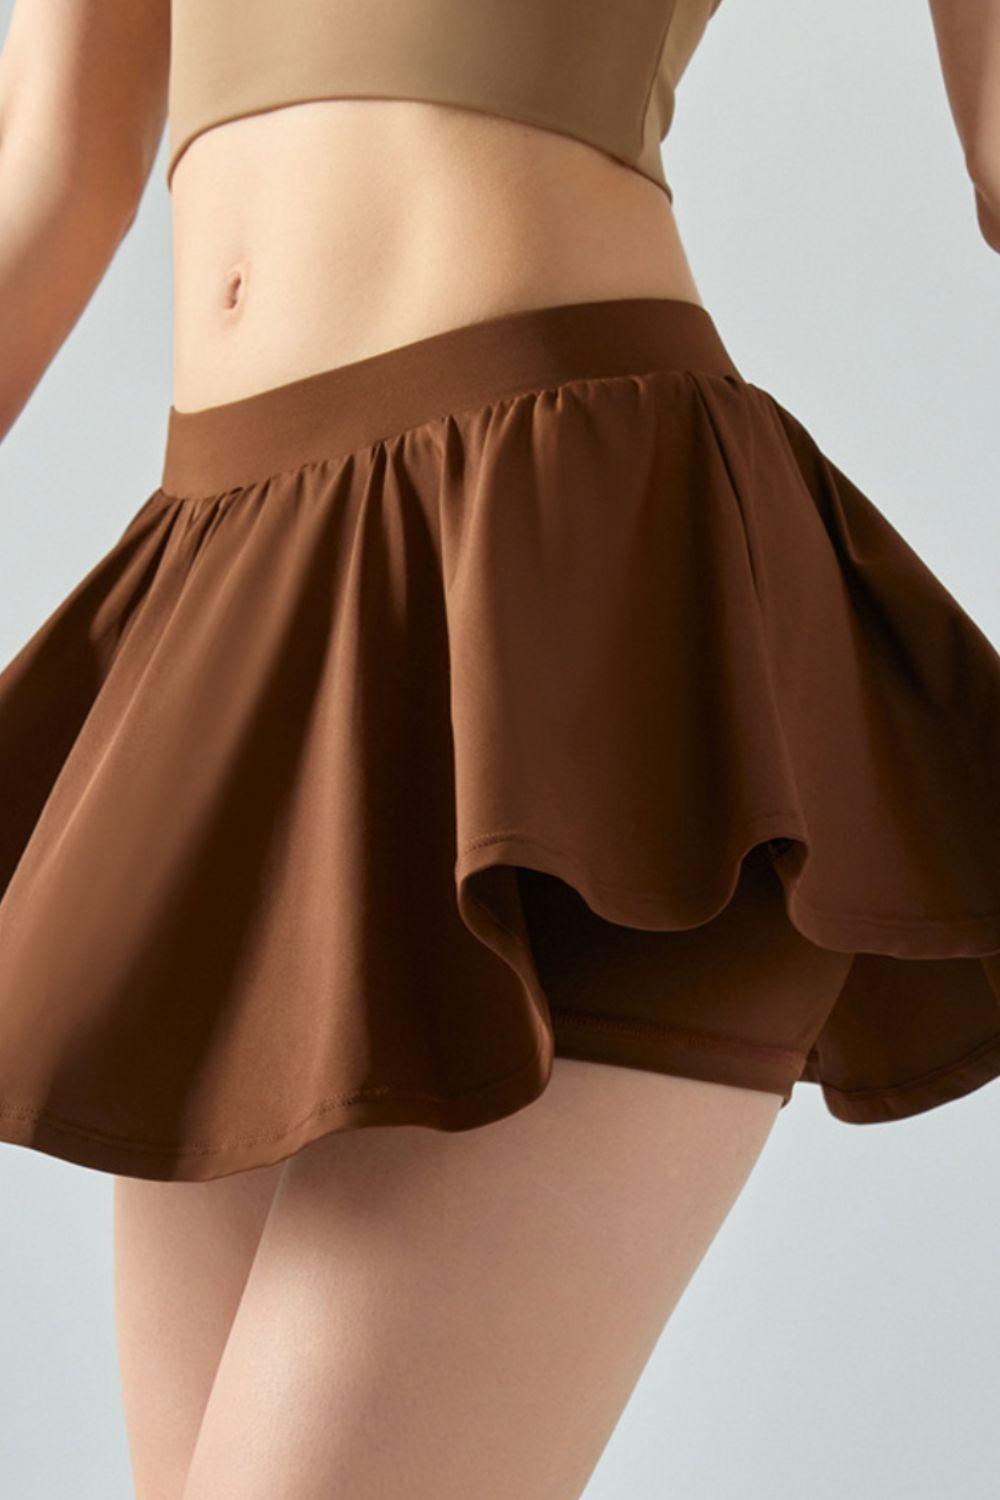 a woman in a tan top and brown skirt